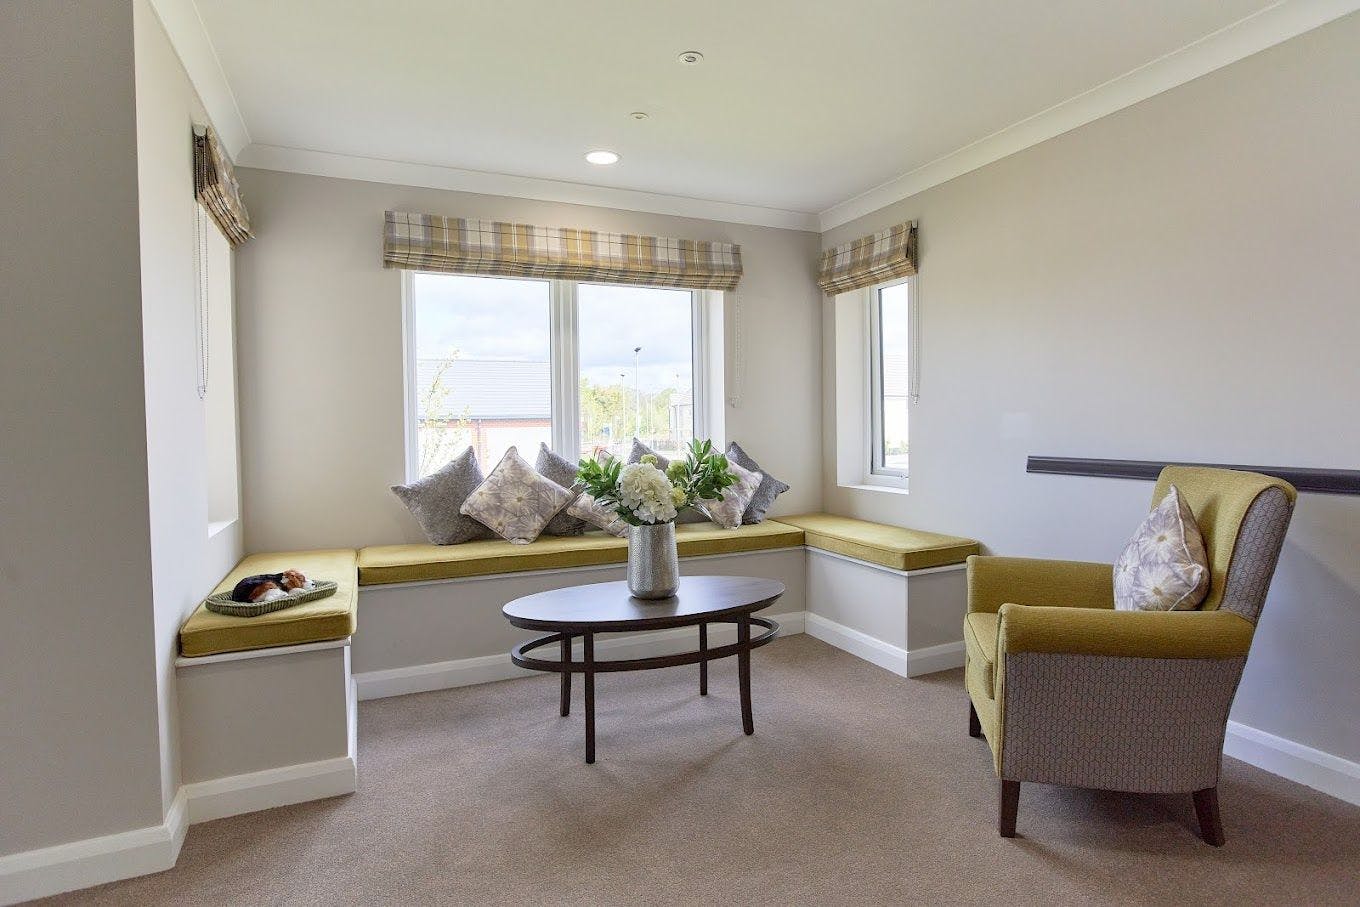 Seating area of Nodens Manor care home in Lydney, Gloucestershire